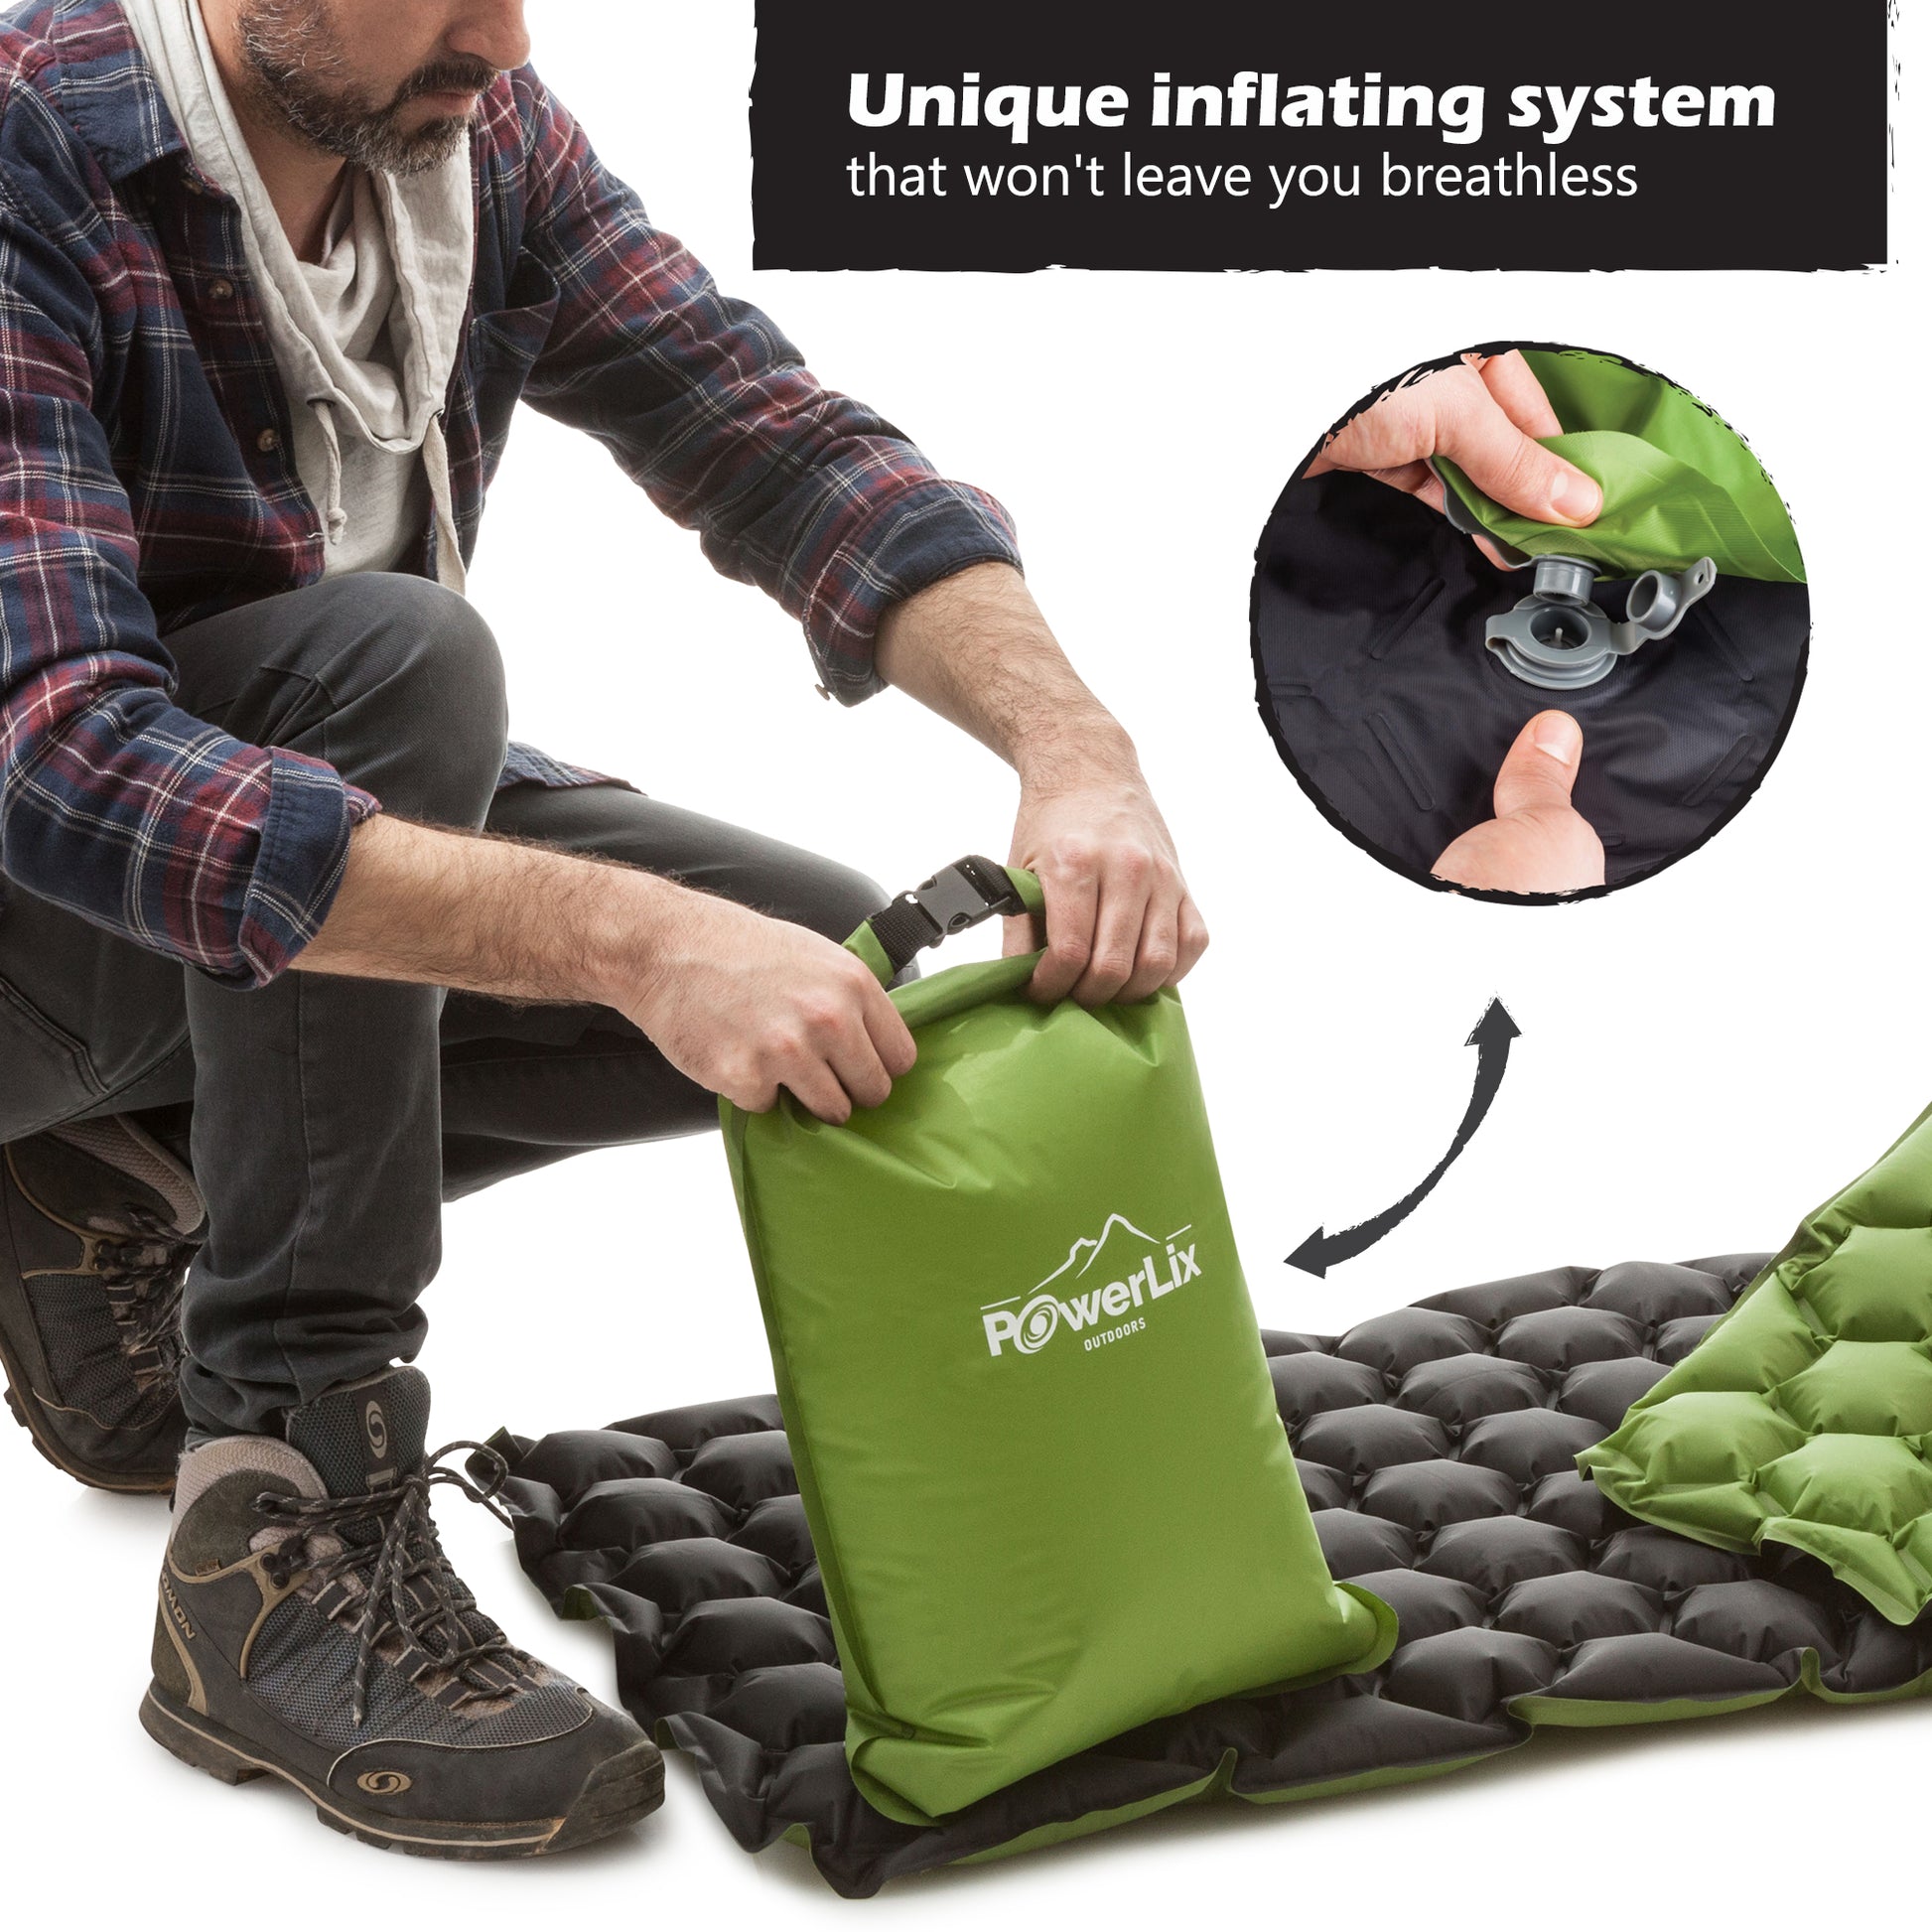 Model inflating a green Powerlix sleeping pad with the bag system. Above text reads, "Unique inflating system that won't leave you breathless."